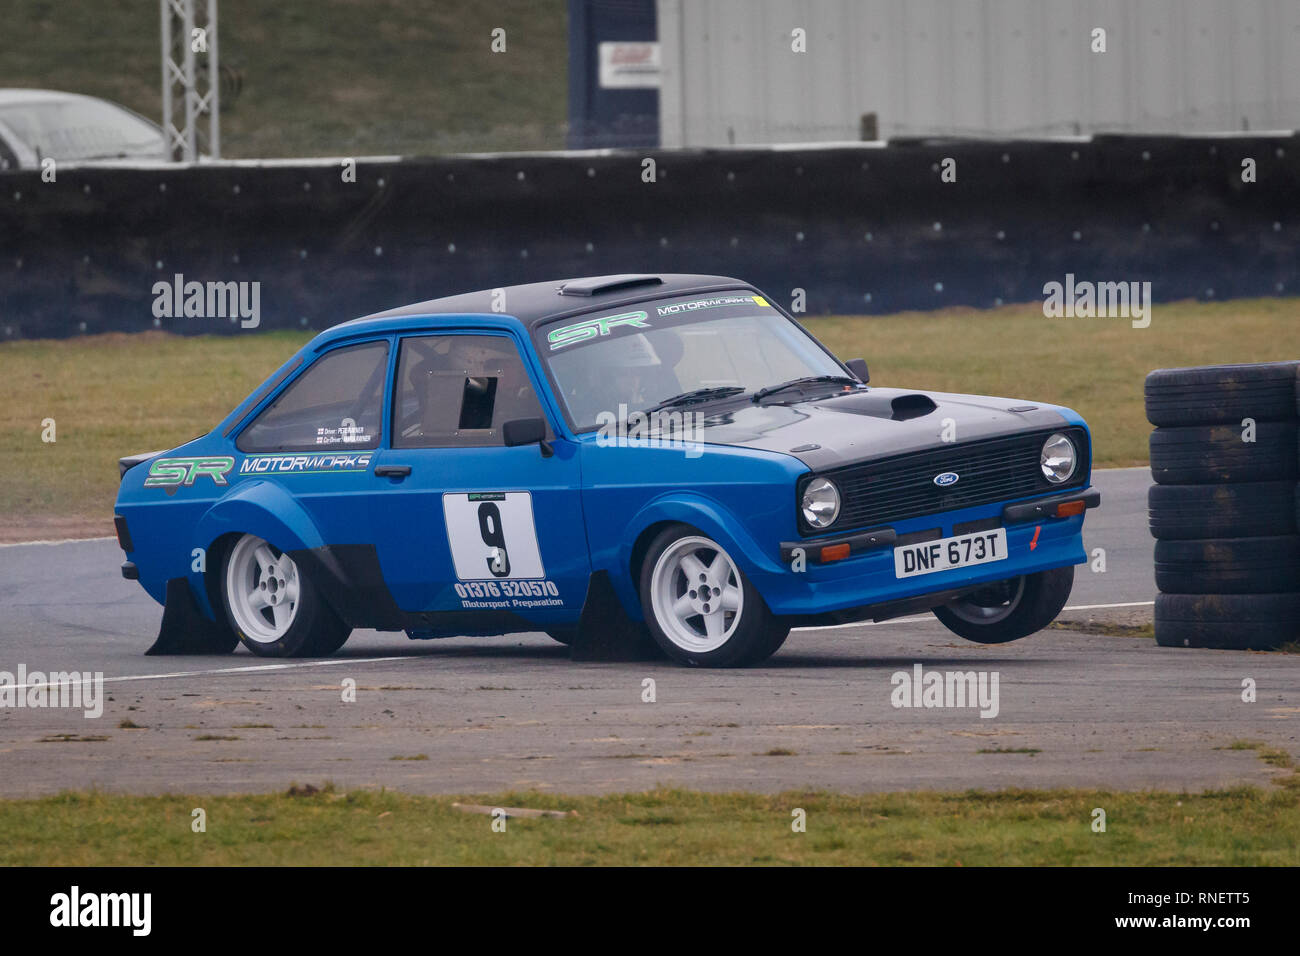 Ford Escort MkII, DNF 673T, with driver Pete Rayner and co-driver Aron Rayner during the 2019 Snetterton Stage Rally, Norfolk. Stock Photo